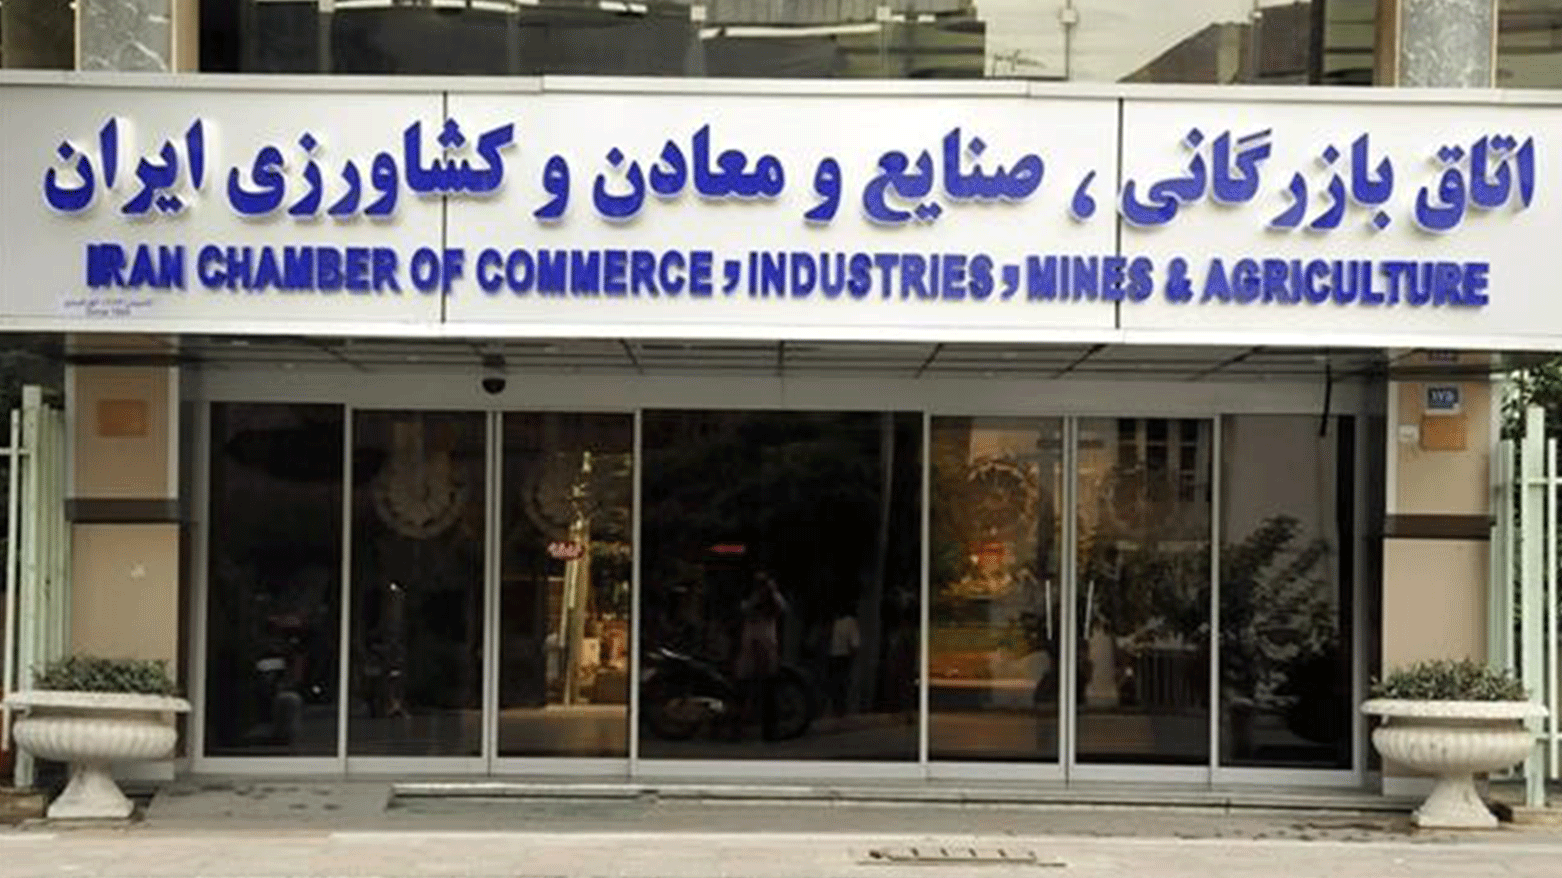 The headquarters of the Tehran Chamber of Commerce. (Photo: The Tehran Chamber of Commerce/ LinkedIn)